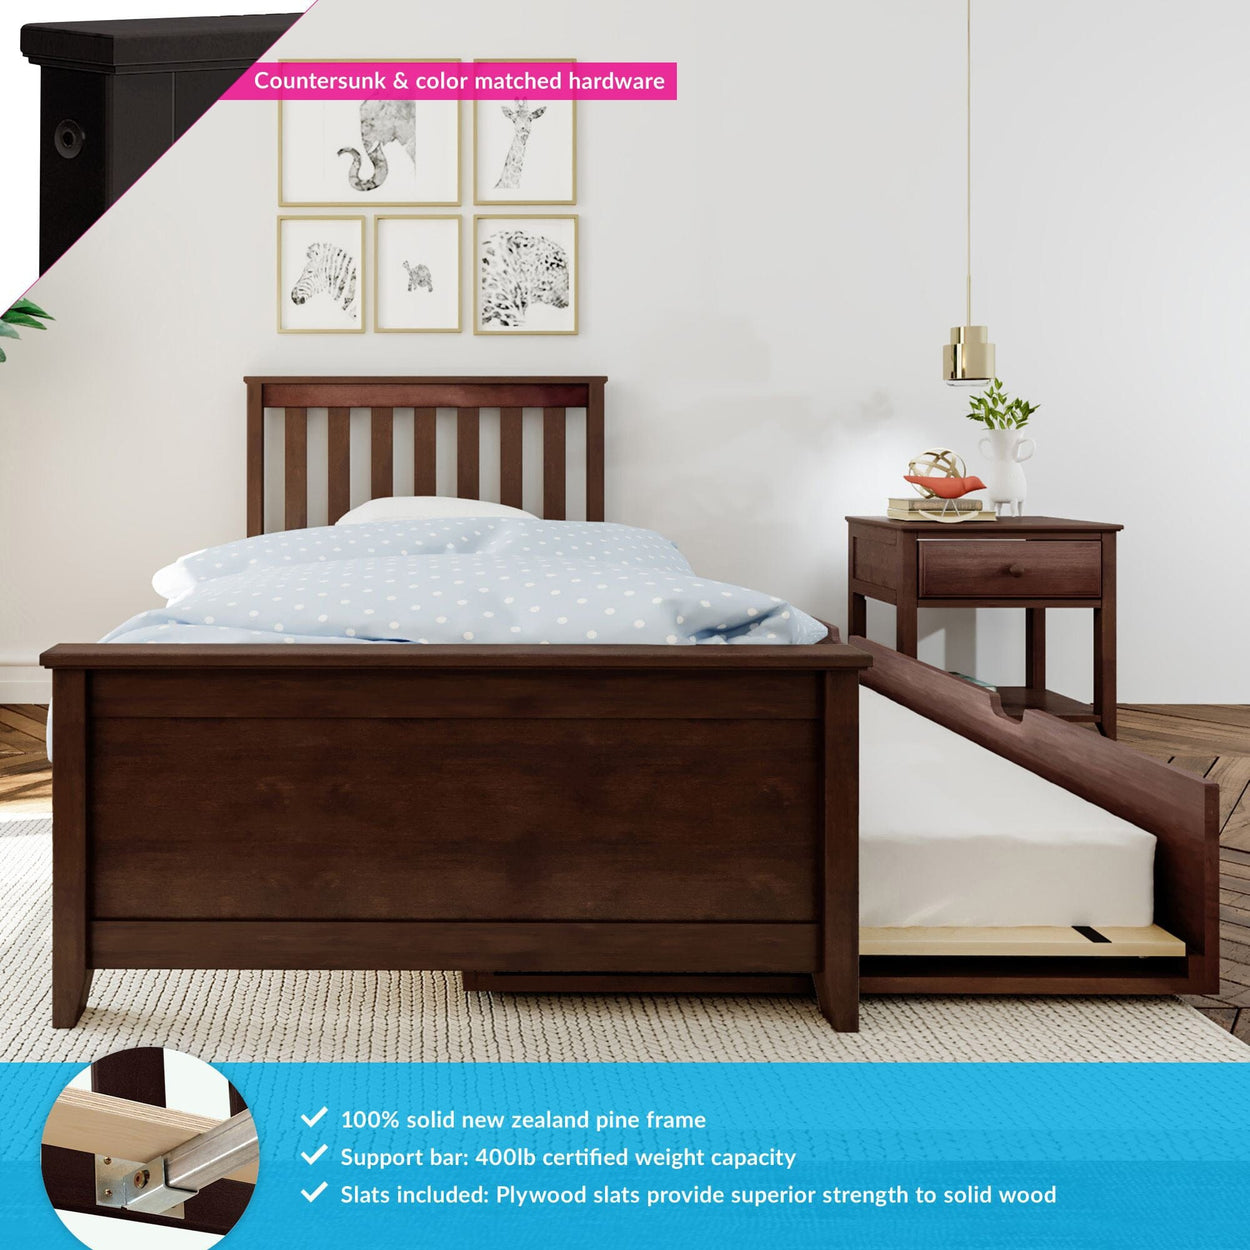 186210-005 : Kids Beds Twin-Size Bed with Trundle, Espresso